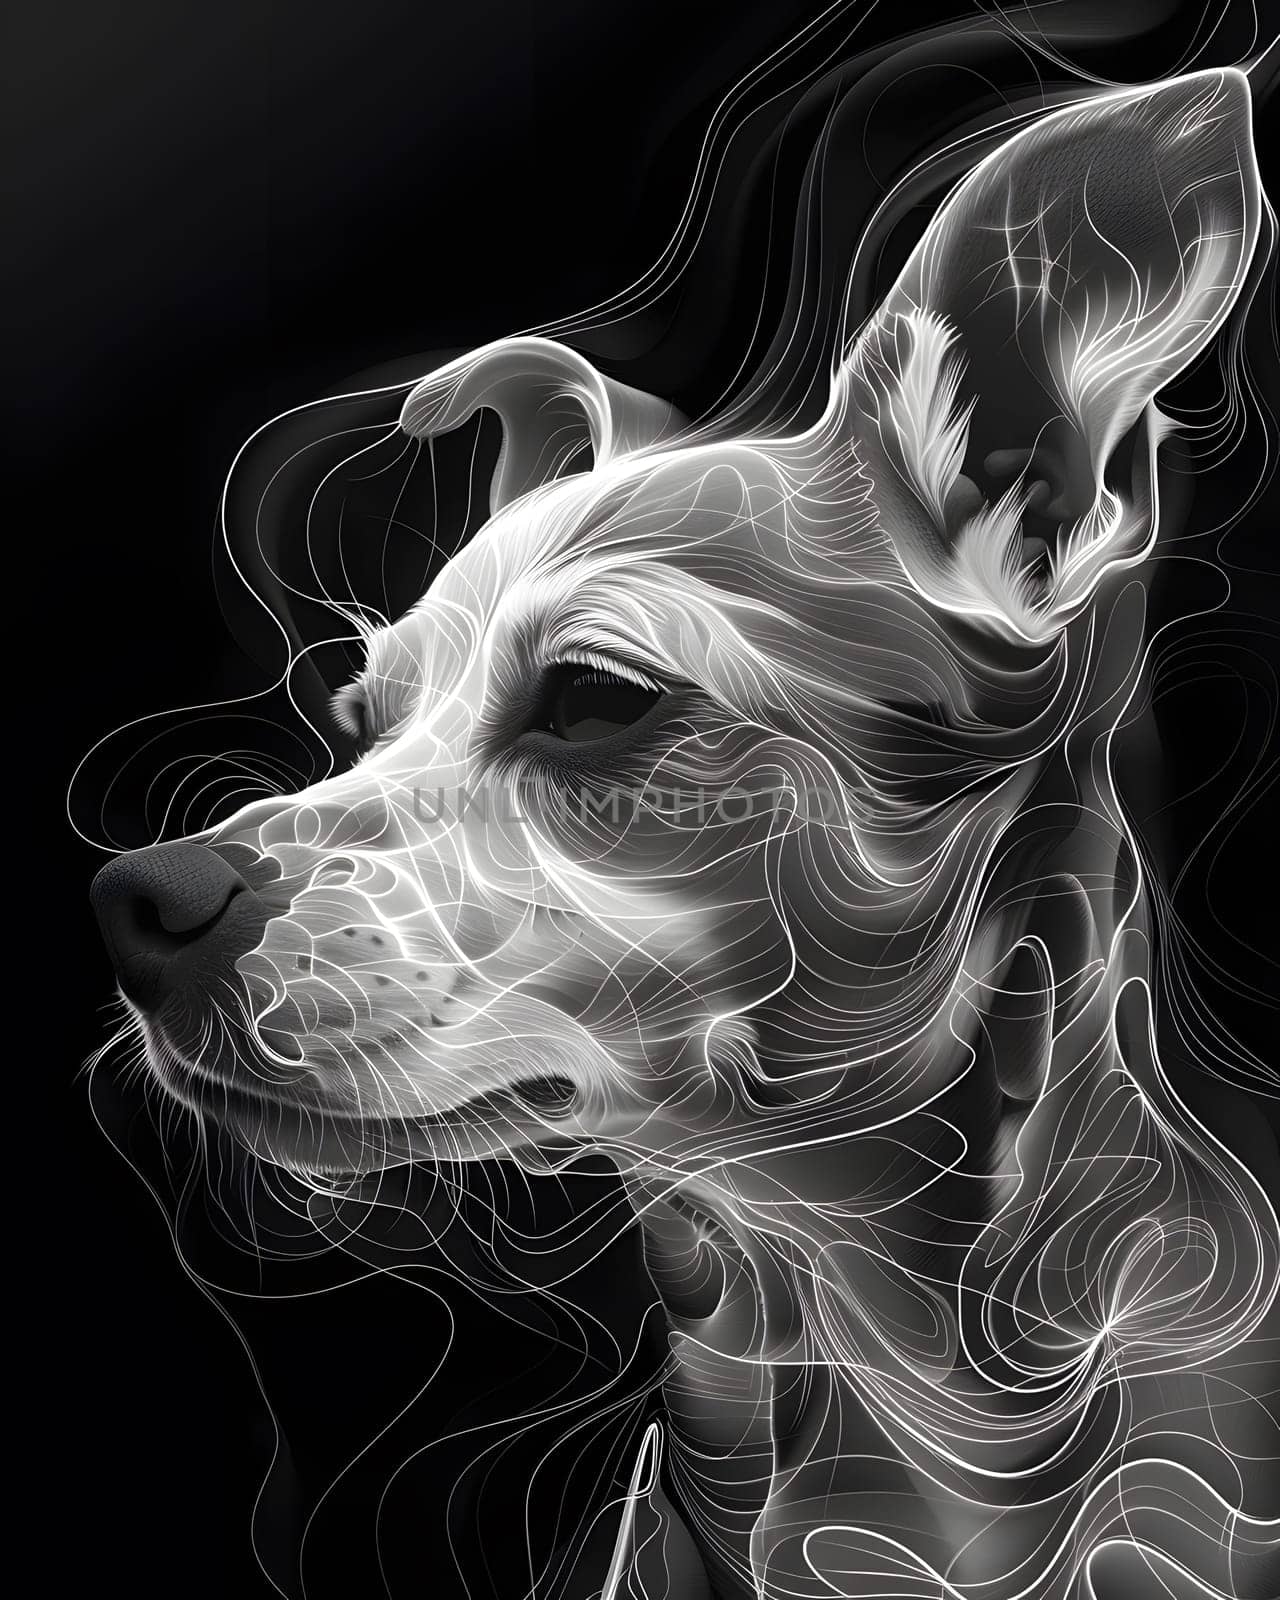 Artistic photo of a smoke dog, showcasing its whiskers and jaws in the darkness by Nadtochiy